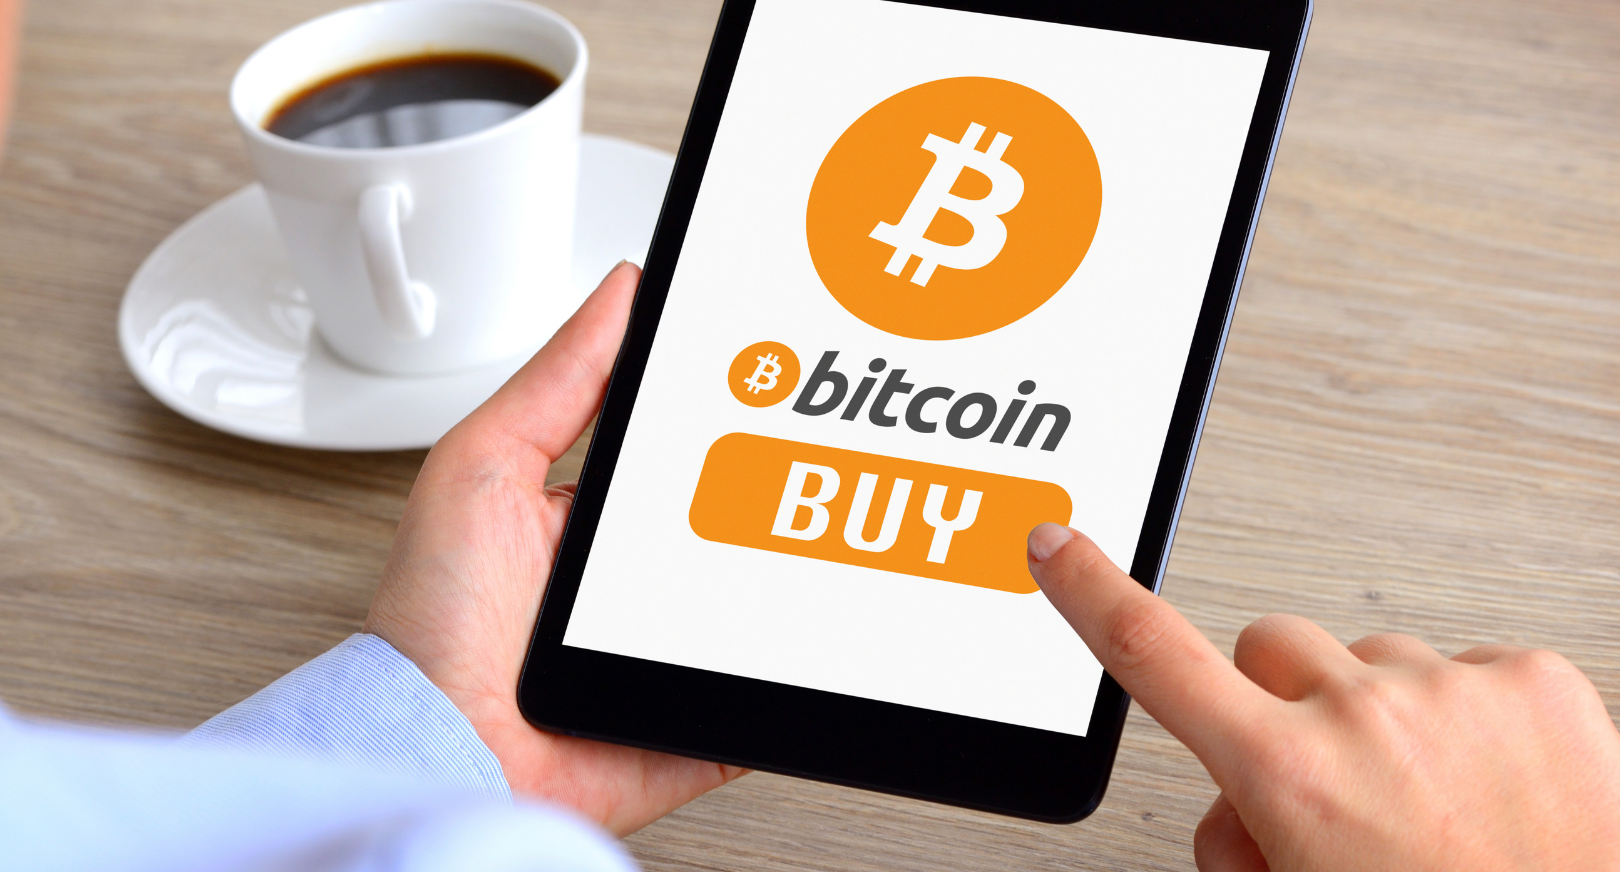 is it wise to buy bitcoin right now